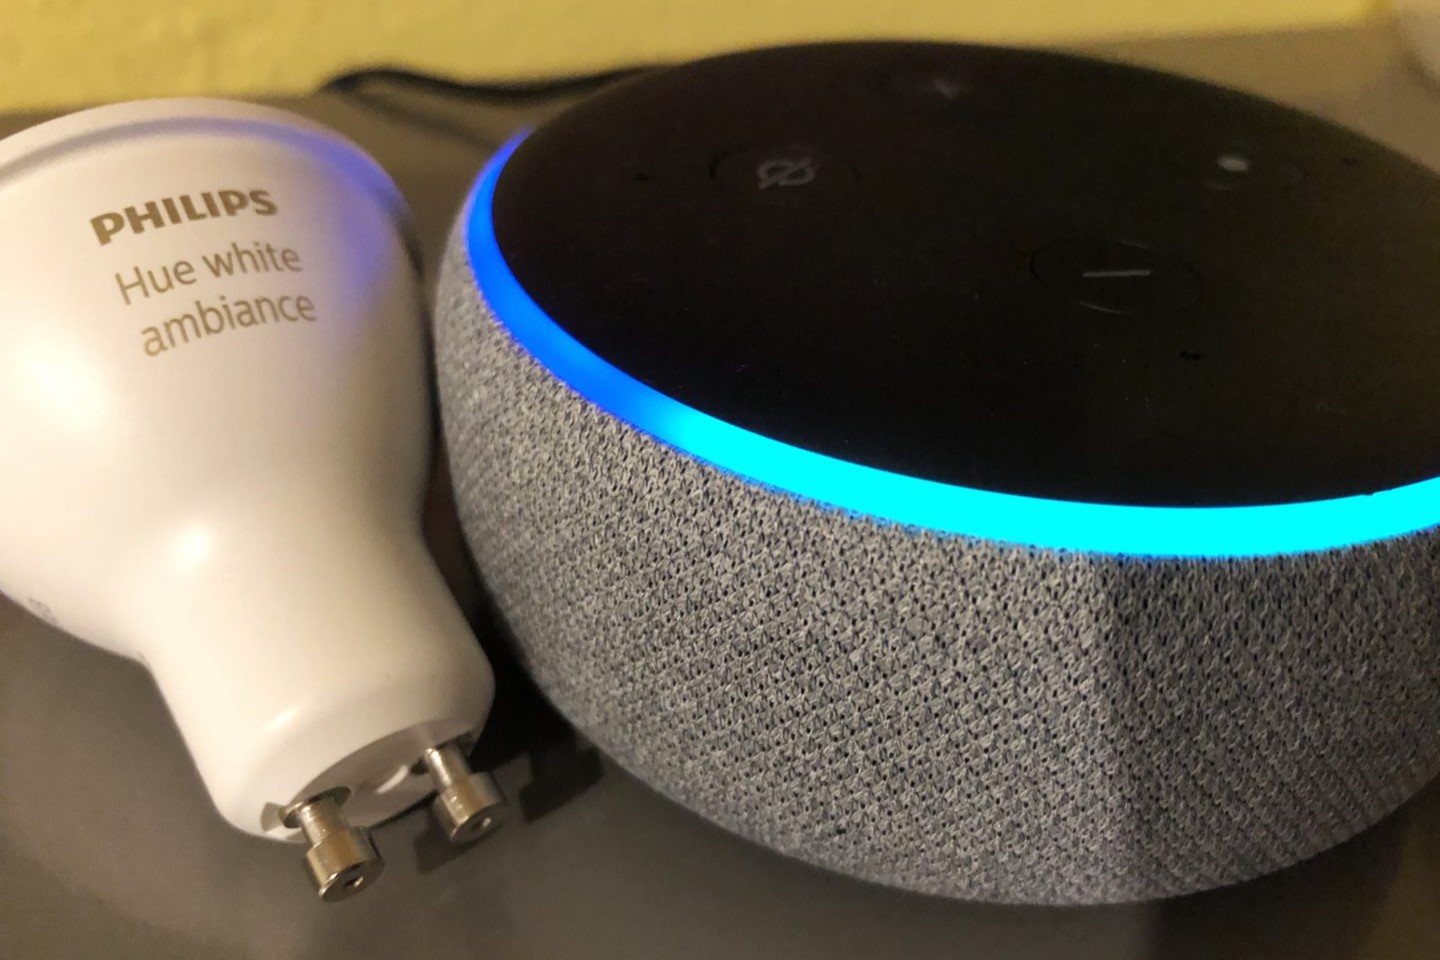 How To Connect Philips Hue To Amazon Echo